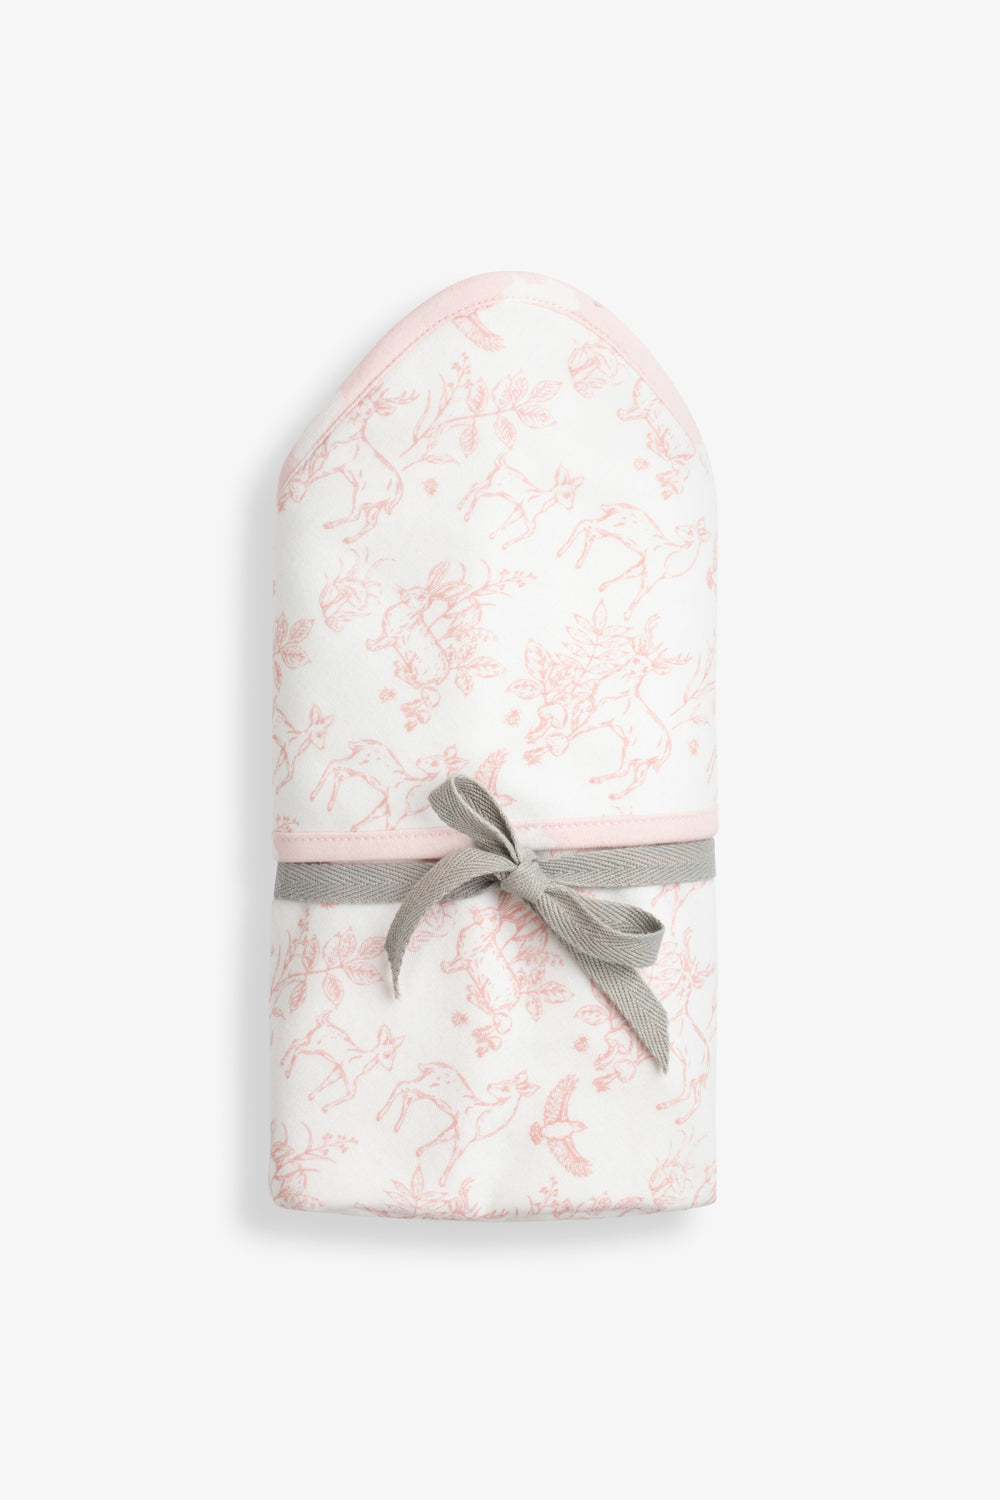 Welcome to the World Gift Set, rose pink woodland print